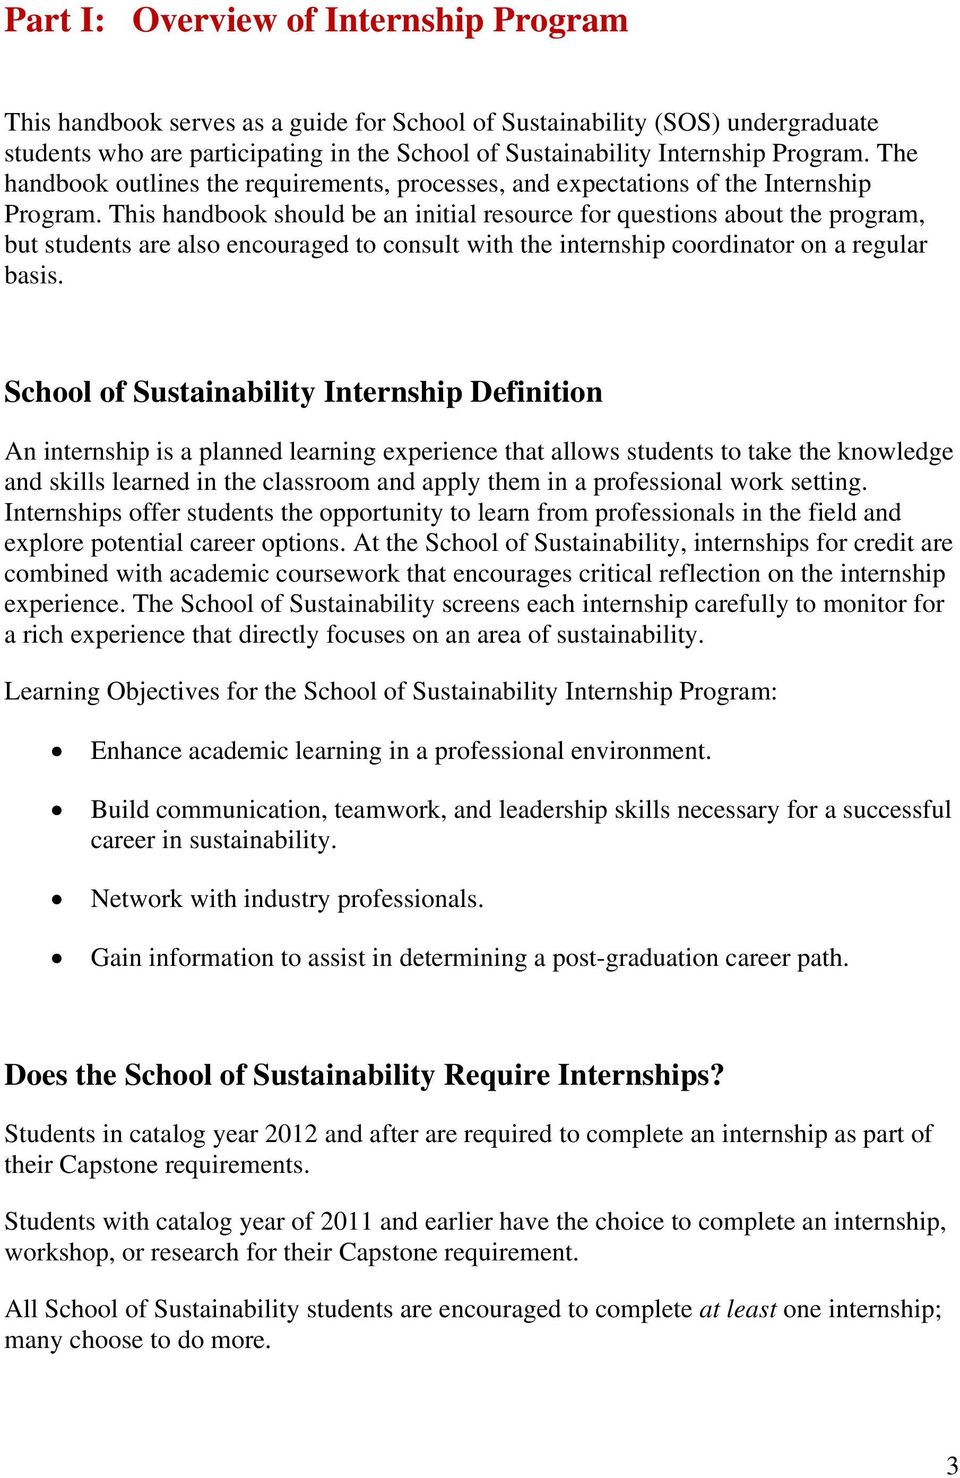 This handbook should be an initial resource for questions about the program, but students are also encouraged to consult with the internship coordinator on a regular basis.